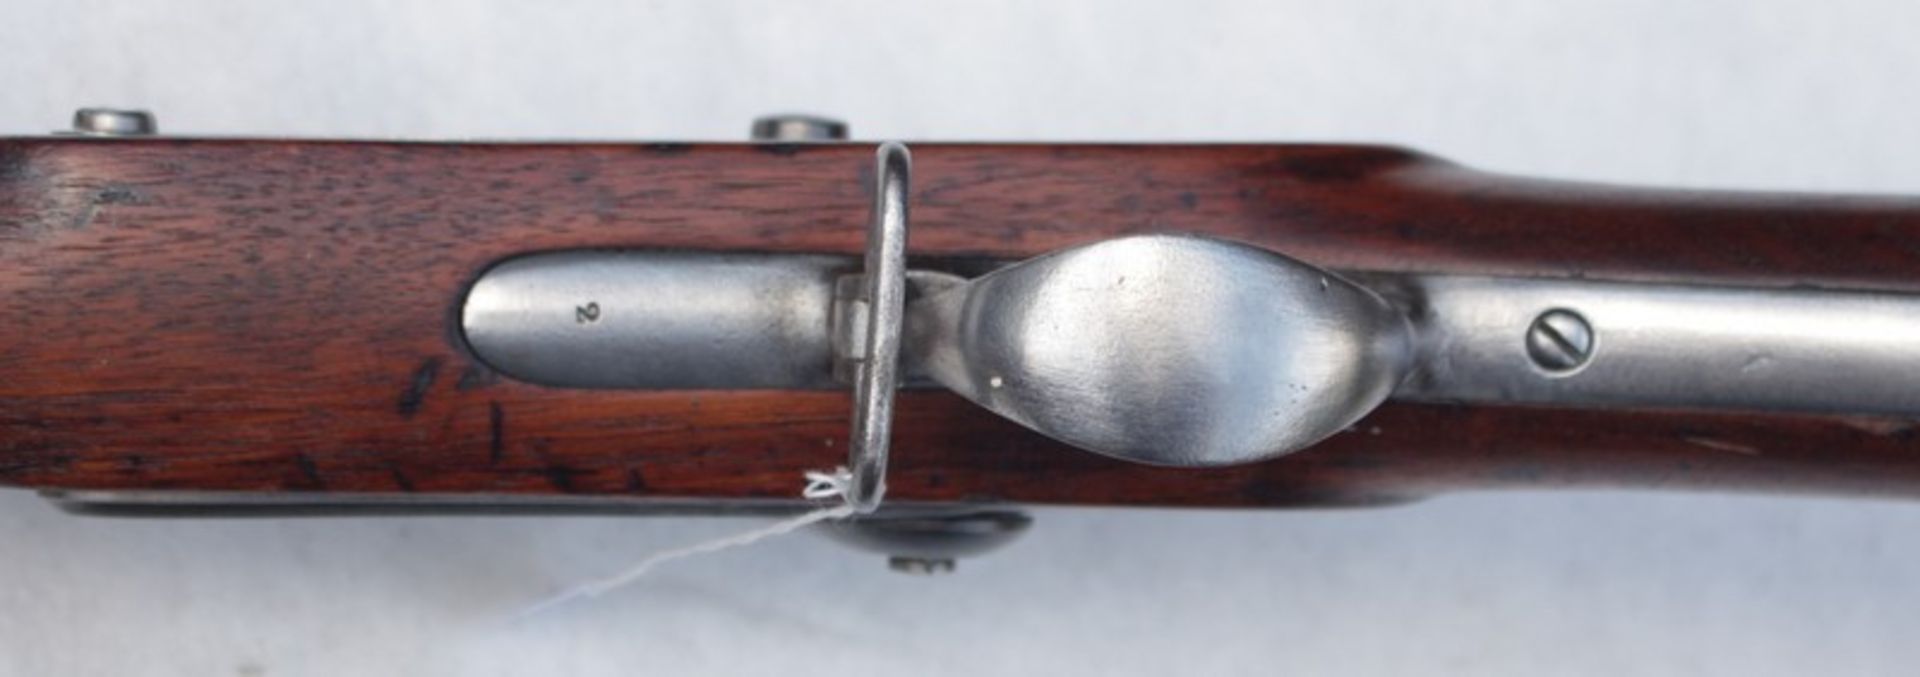 US Model 1822 Harpers Ferry Conversion Musket, American Civil War - Image 11 of 11